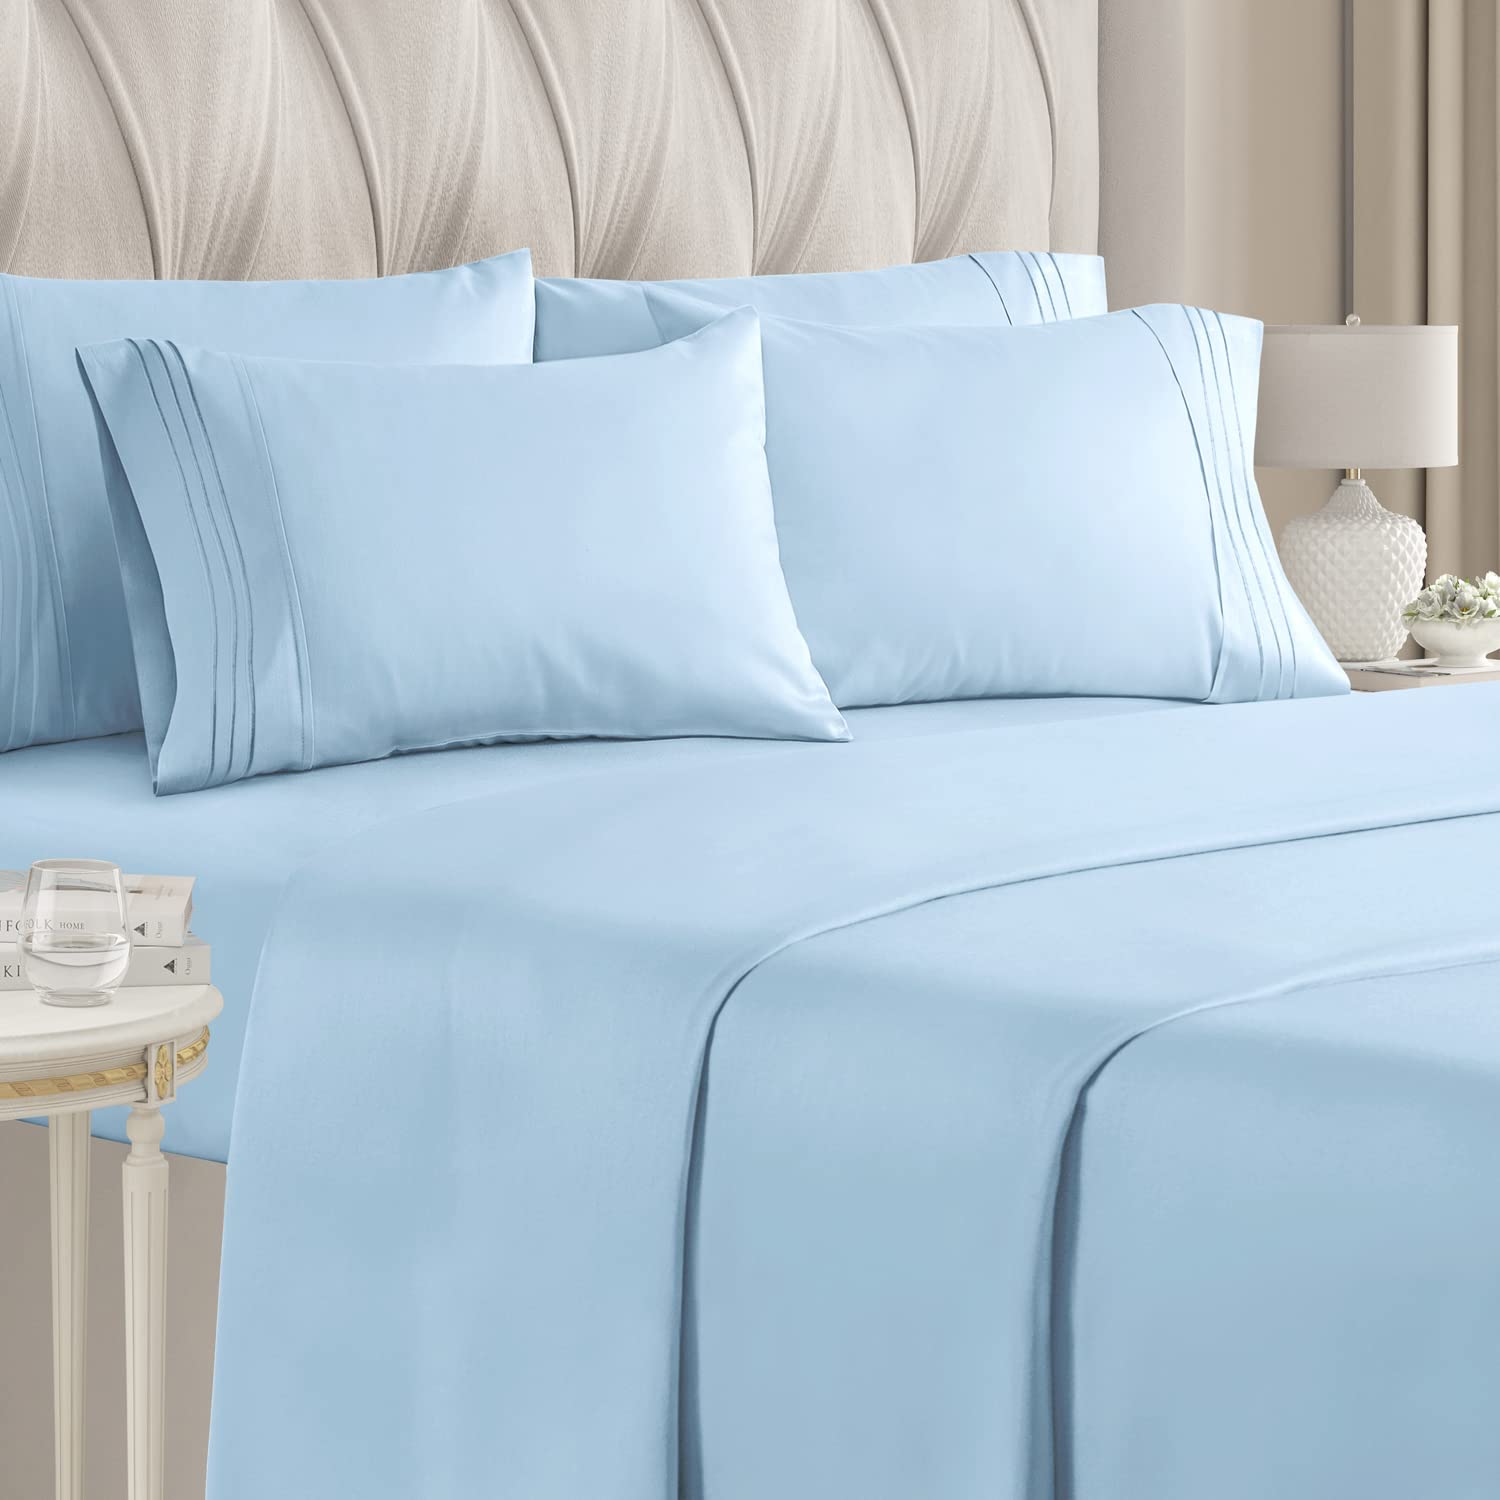 Book Cover California King Size Sheet Set - 6 Piece Set - Hotel Luxury Bed Sheets - Soft - Deep Pockets - Easy Fit - Cooling Sheets - Wrinkle Free - Light Blue Bed Sheets - Cali Kings Sheets - Baby Blue 6 PC 09 - Light Blue California King